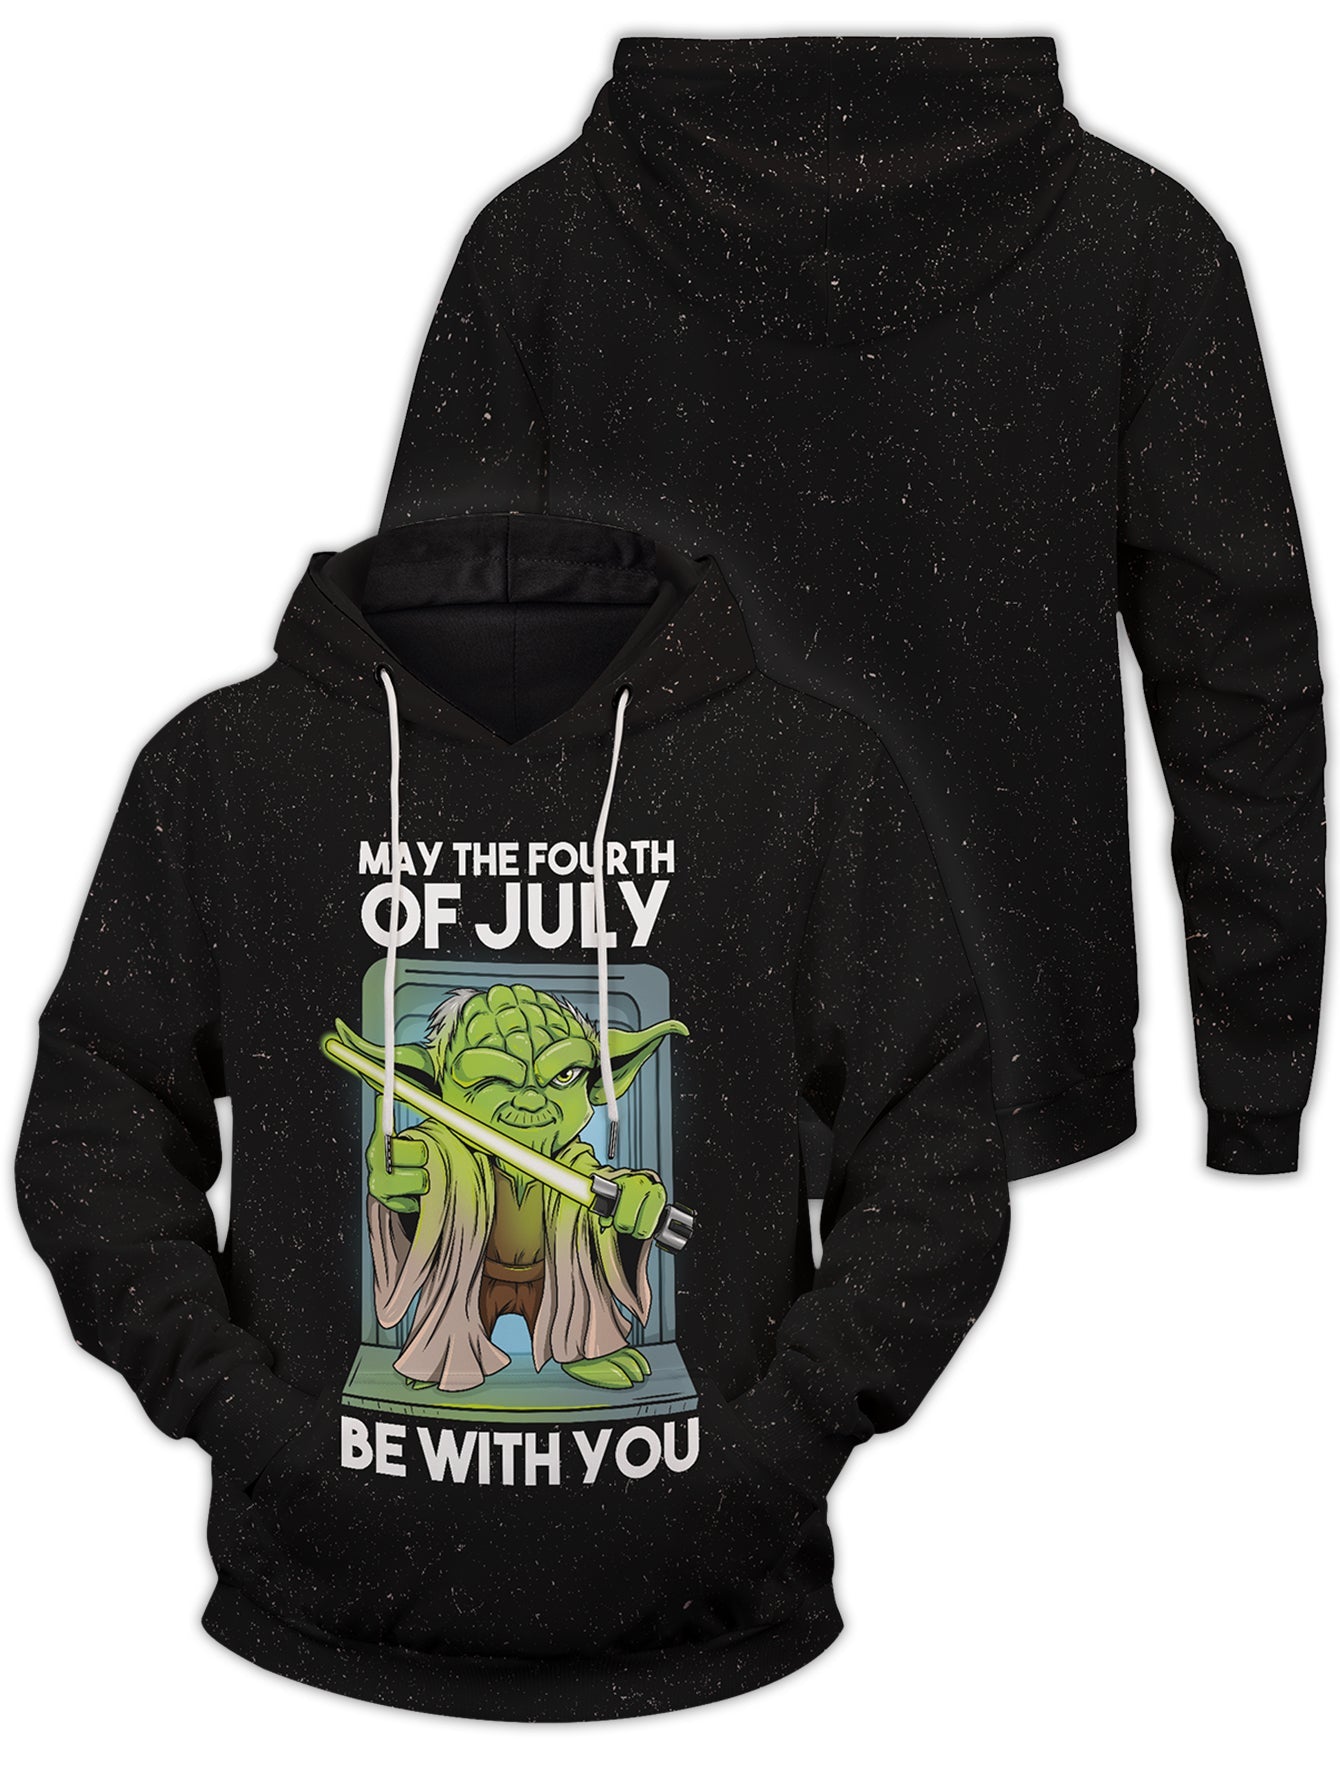 Fandomaniax - May the 4th of July be with you Unisex Pullover Hoodie